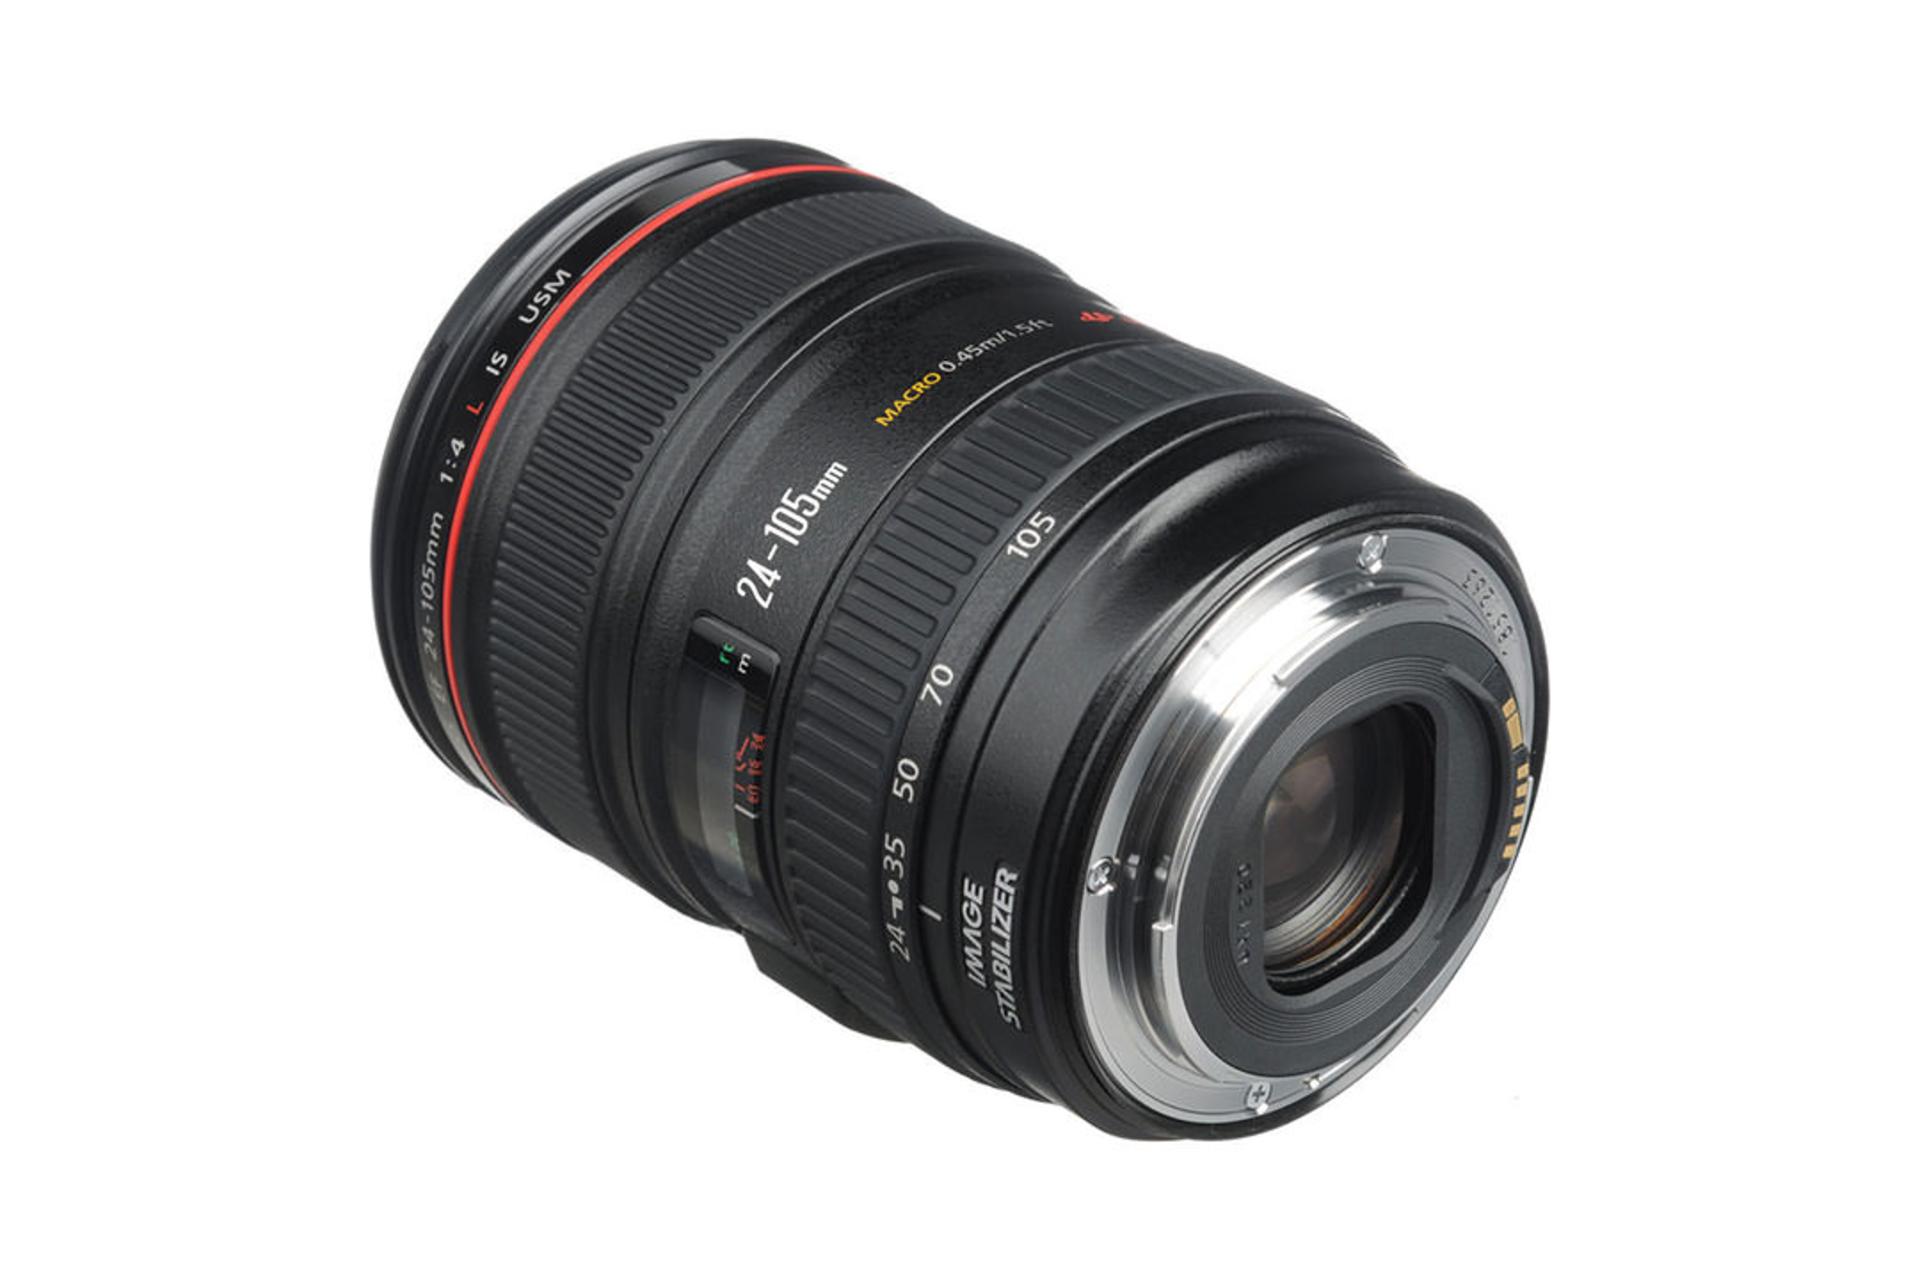 Canon EF 24-105mm f/4L IS USM	